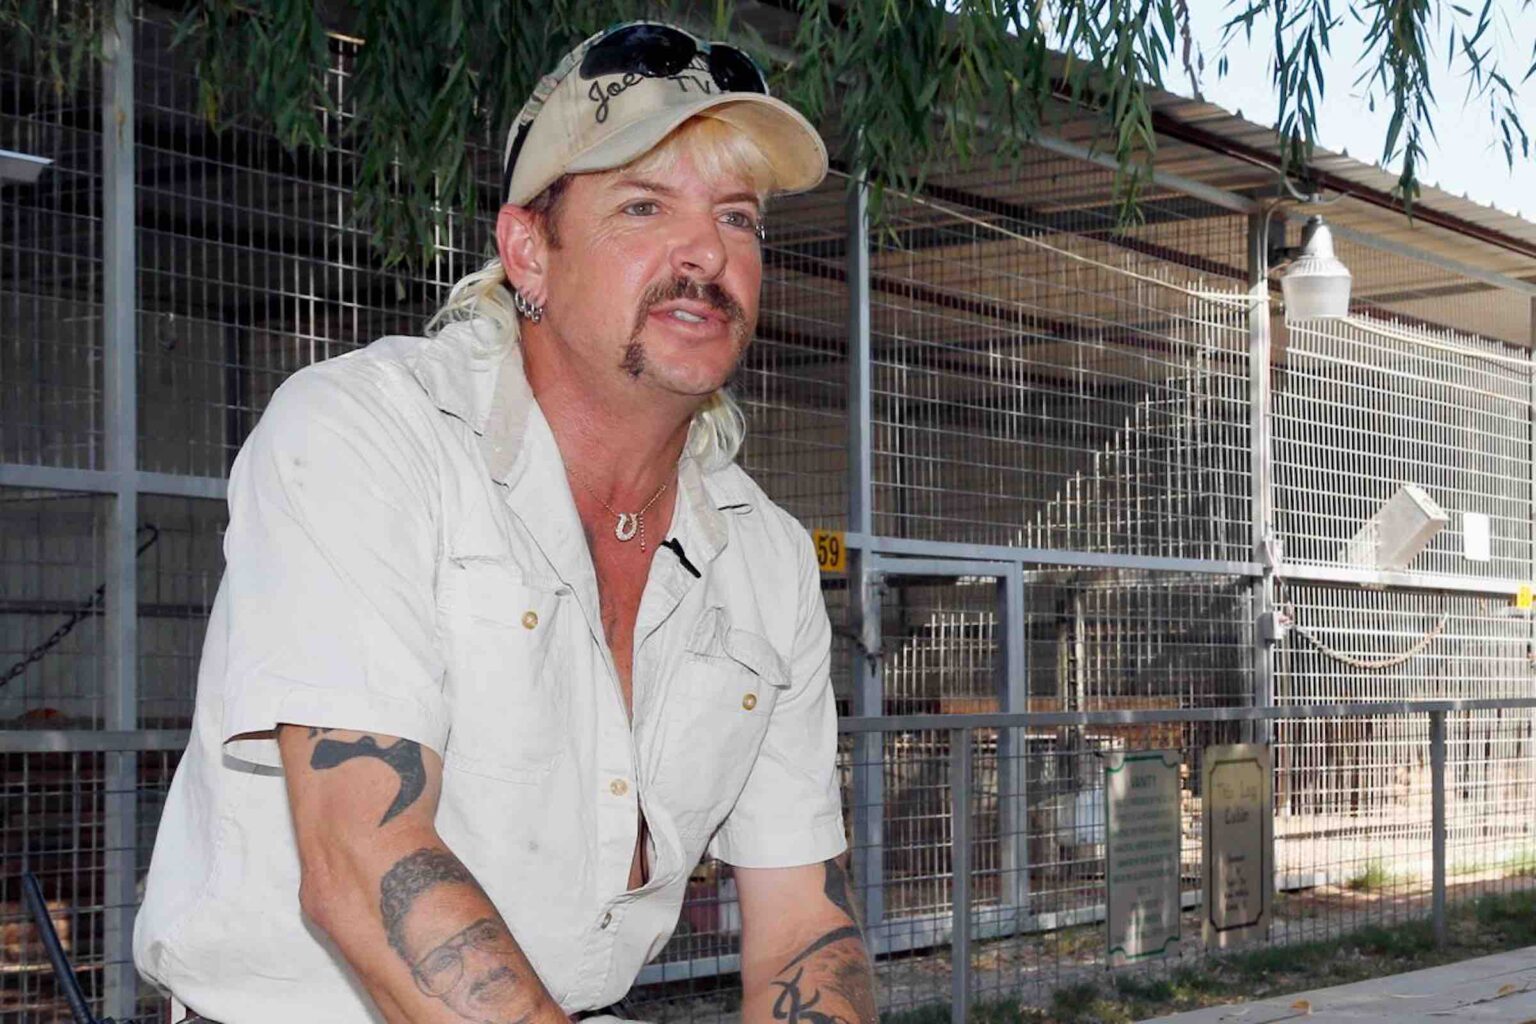 It’s hard to believe that Netflix's 'Tiger King' counts as true crime. Here's all the crimes Joe Exotic was charged and sent to jail for.